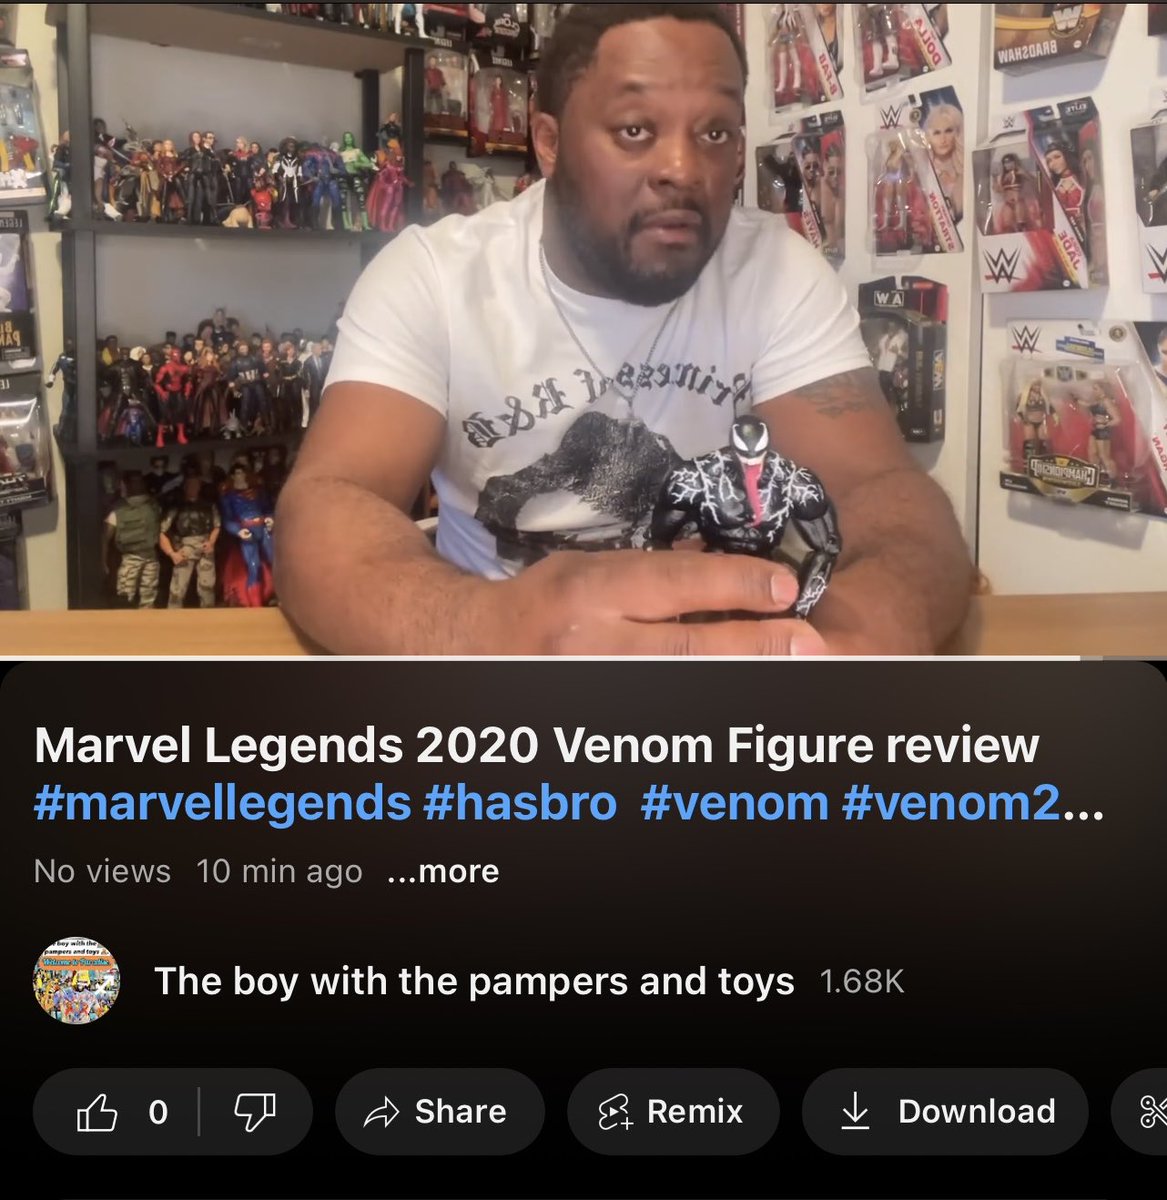 Please like, share & subscribe today 🌎  #youtuber #figurereview #subscribe  #share #like #support #toychannel  #theboywiththepampersandtoys  #hasbrotoys  #marvellegends  #marveluniverse